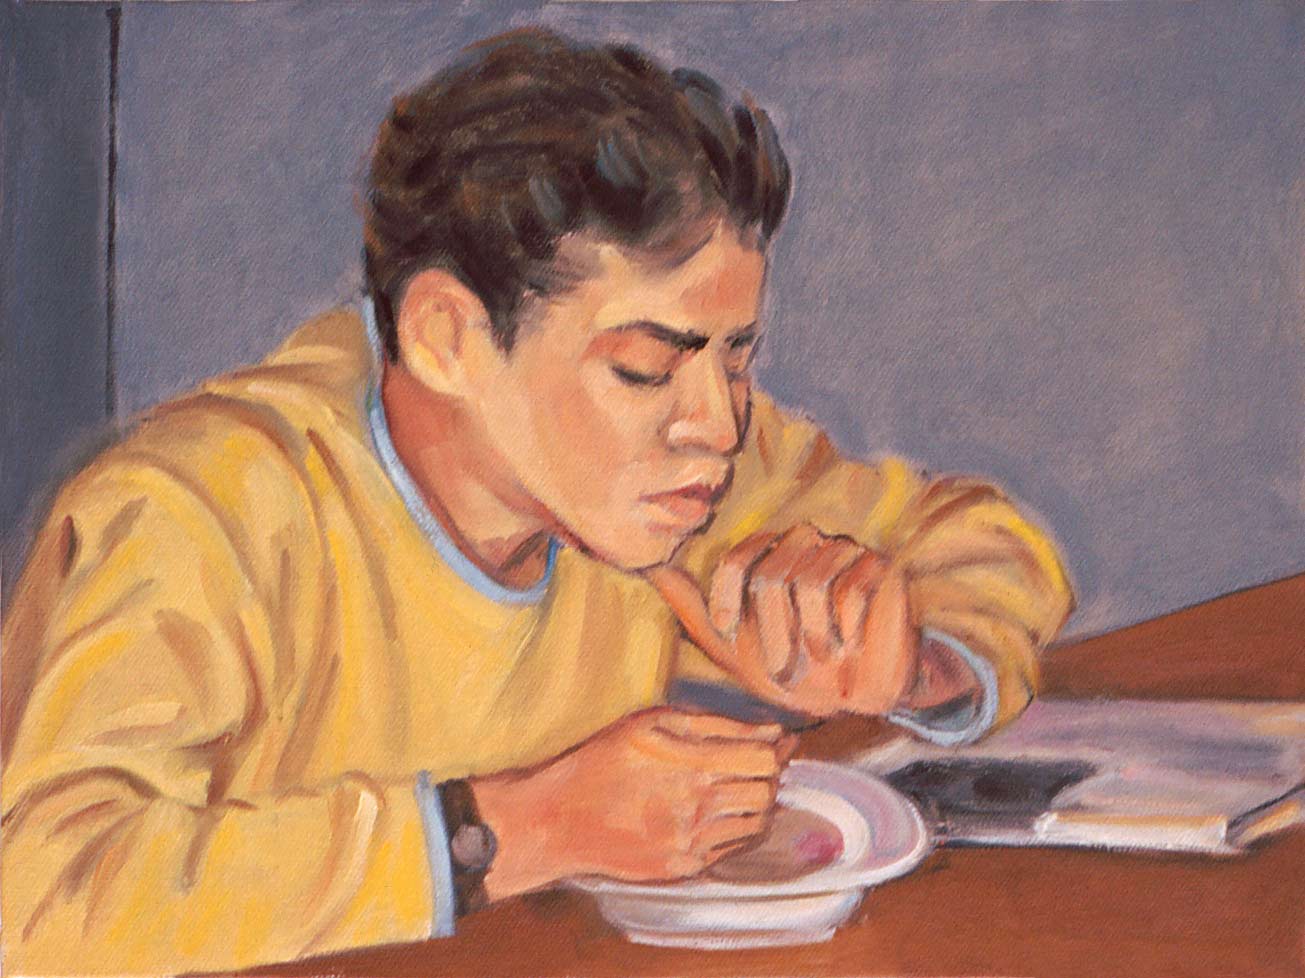 Thumbnail of Ben Rosen Eating: by Ethel Fisher, 1988, oil on canvas, 9 x 12 inches, twentieth century figure painting.